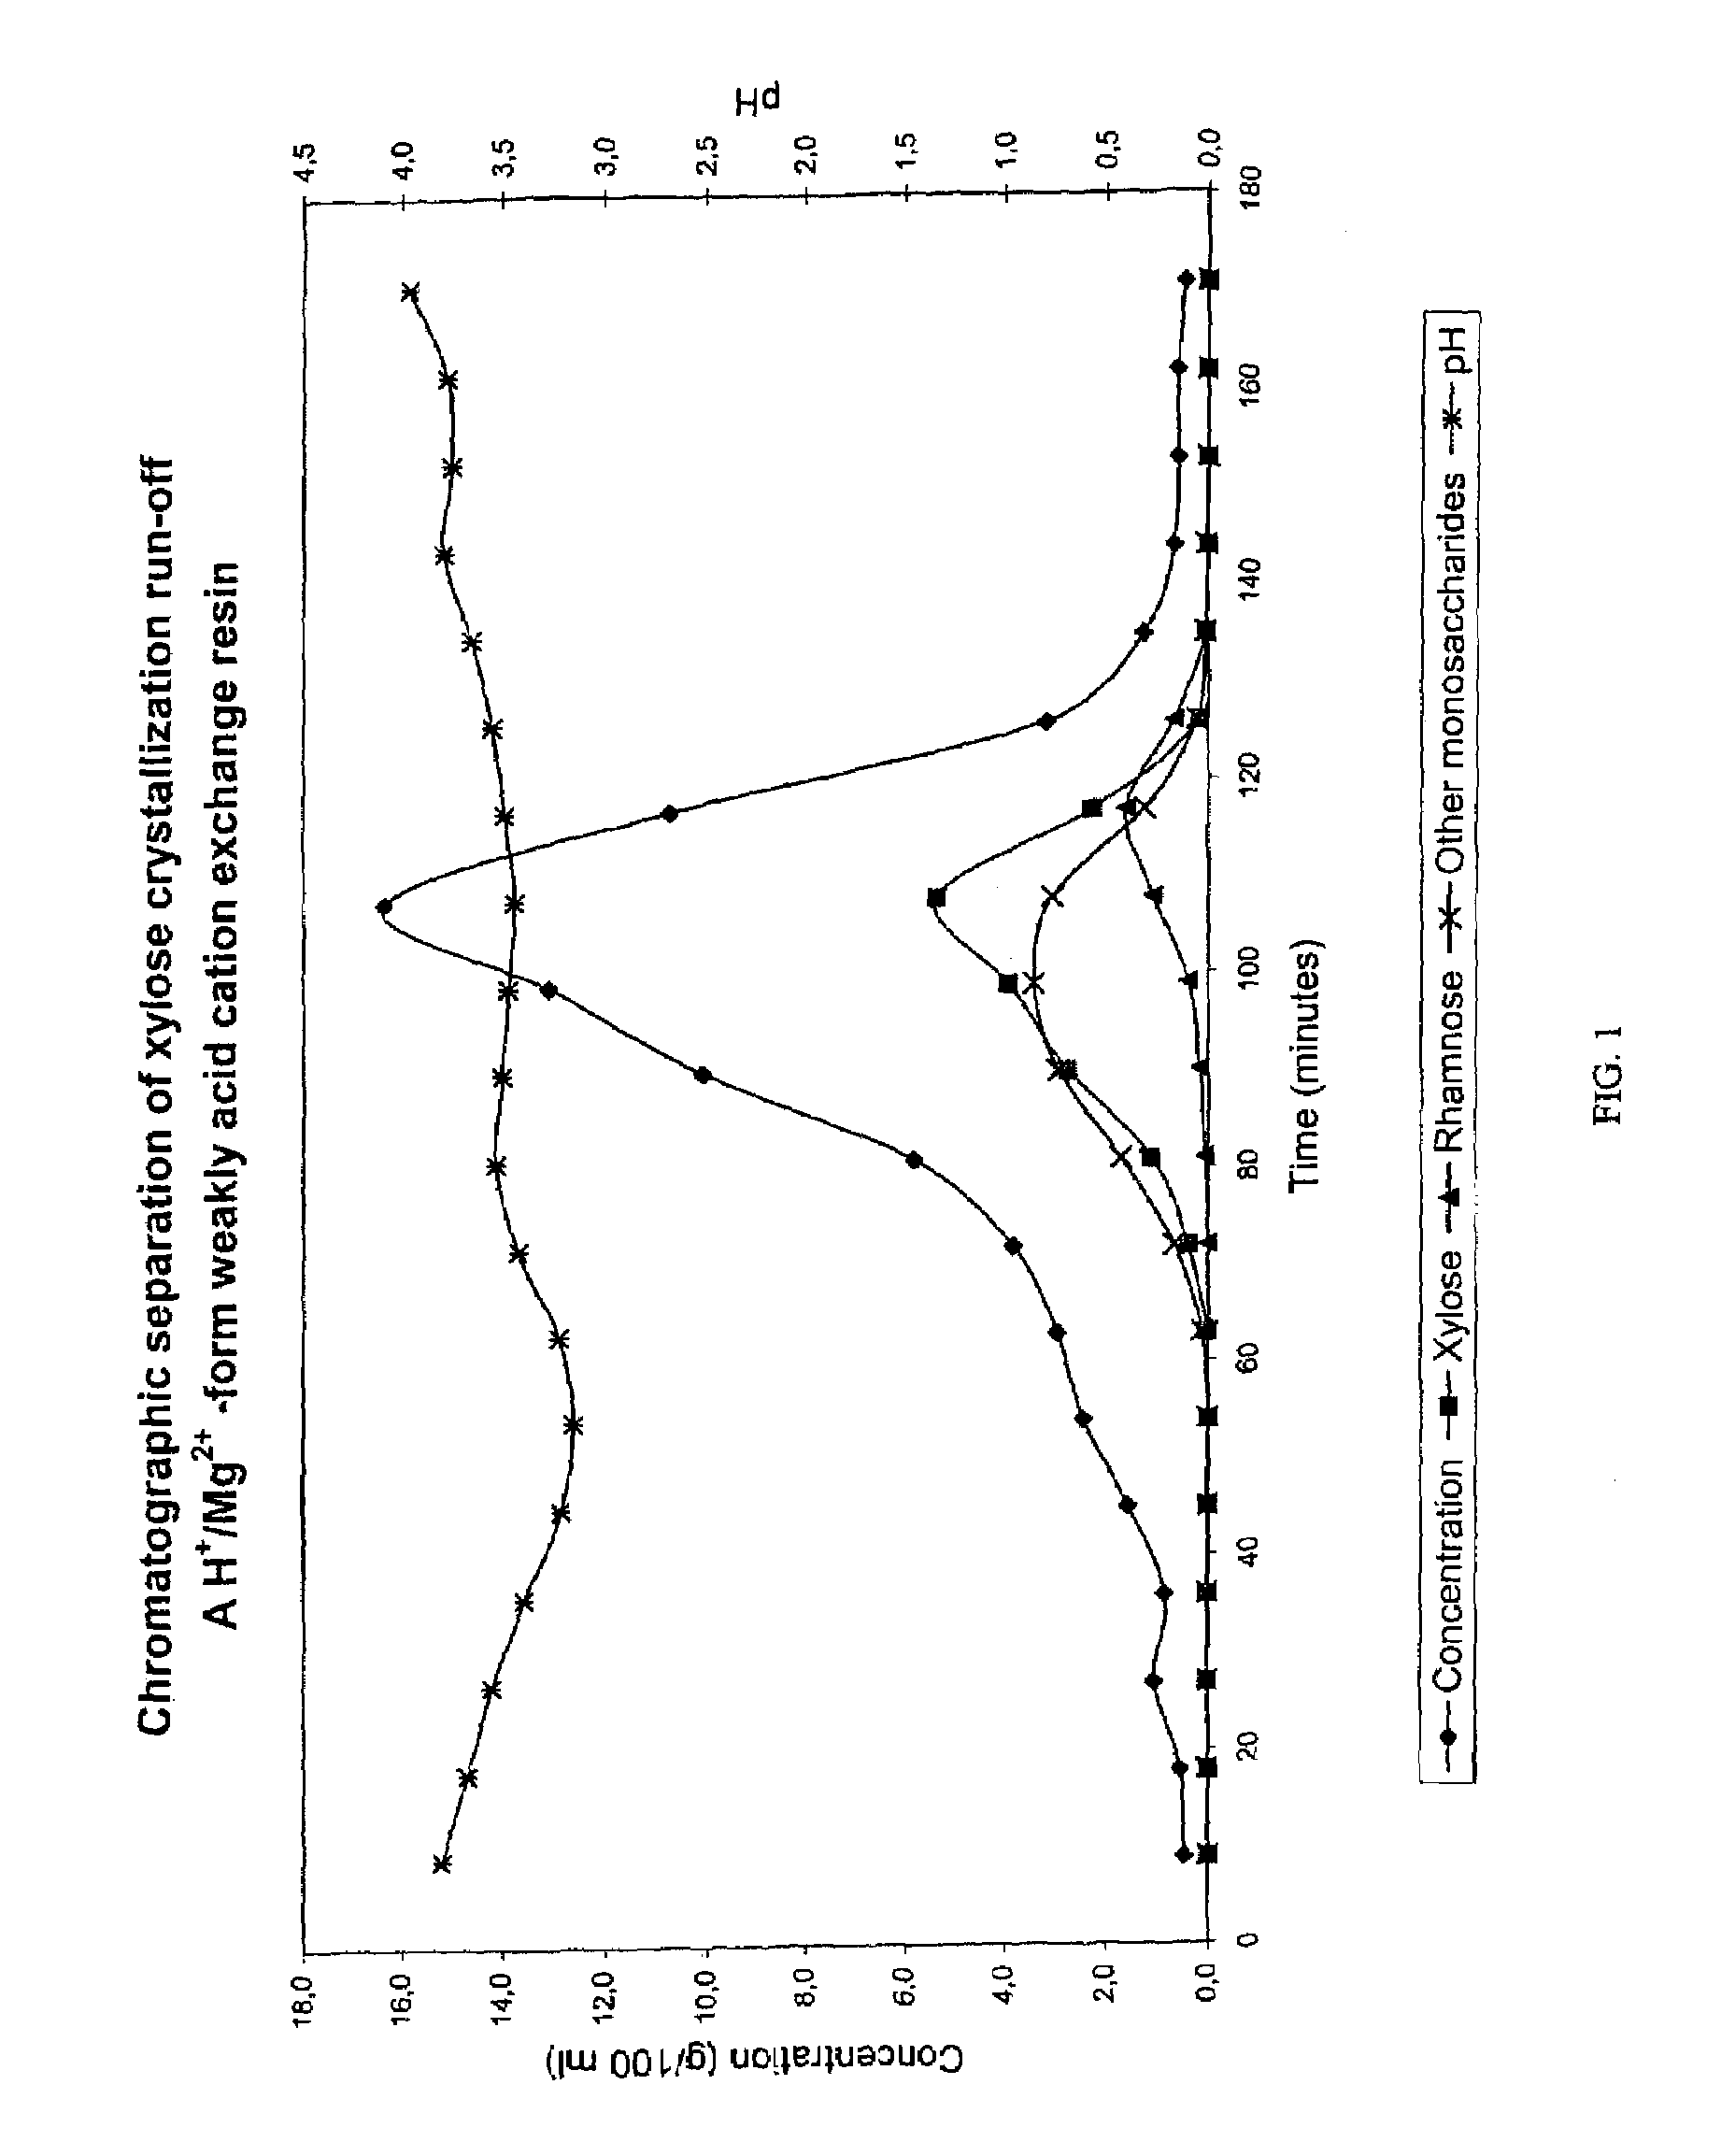 Separation of sugars, sugar alcohols, carbohydrates and mixtures thereof